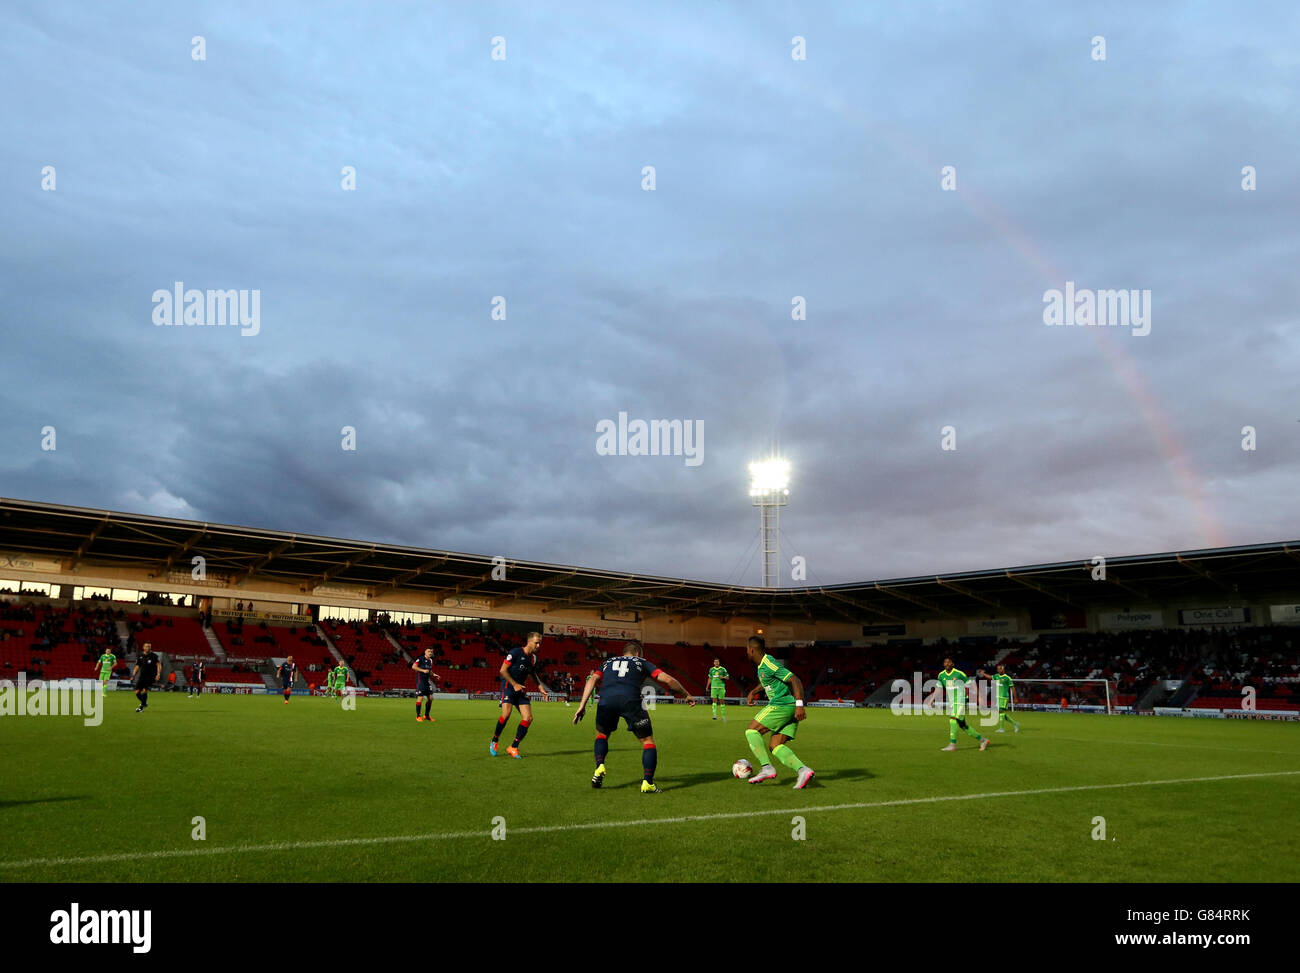 Soccer - Pre-Season Friendly - Doncaster Rovers v Sunderland - Keepmoat Stadium. A rainbow forms during the Pre-Season Friendly match at the Keepmoat Stadium, Doncaster. Stock Photo